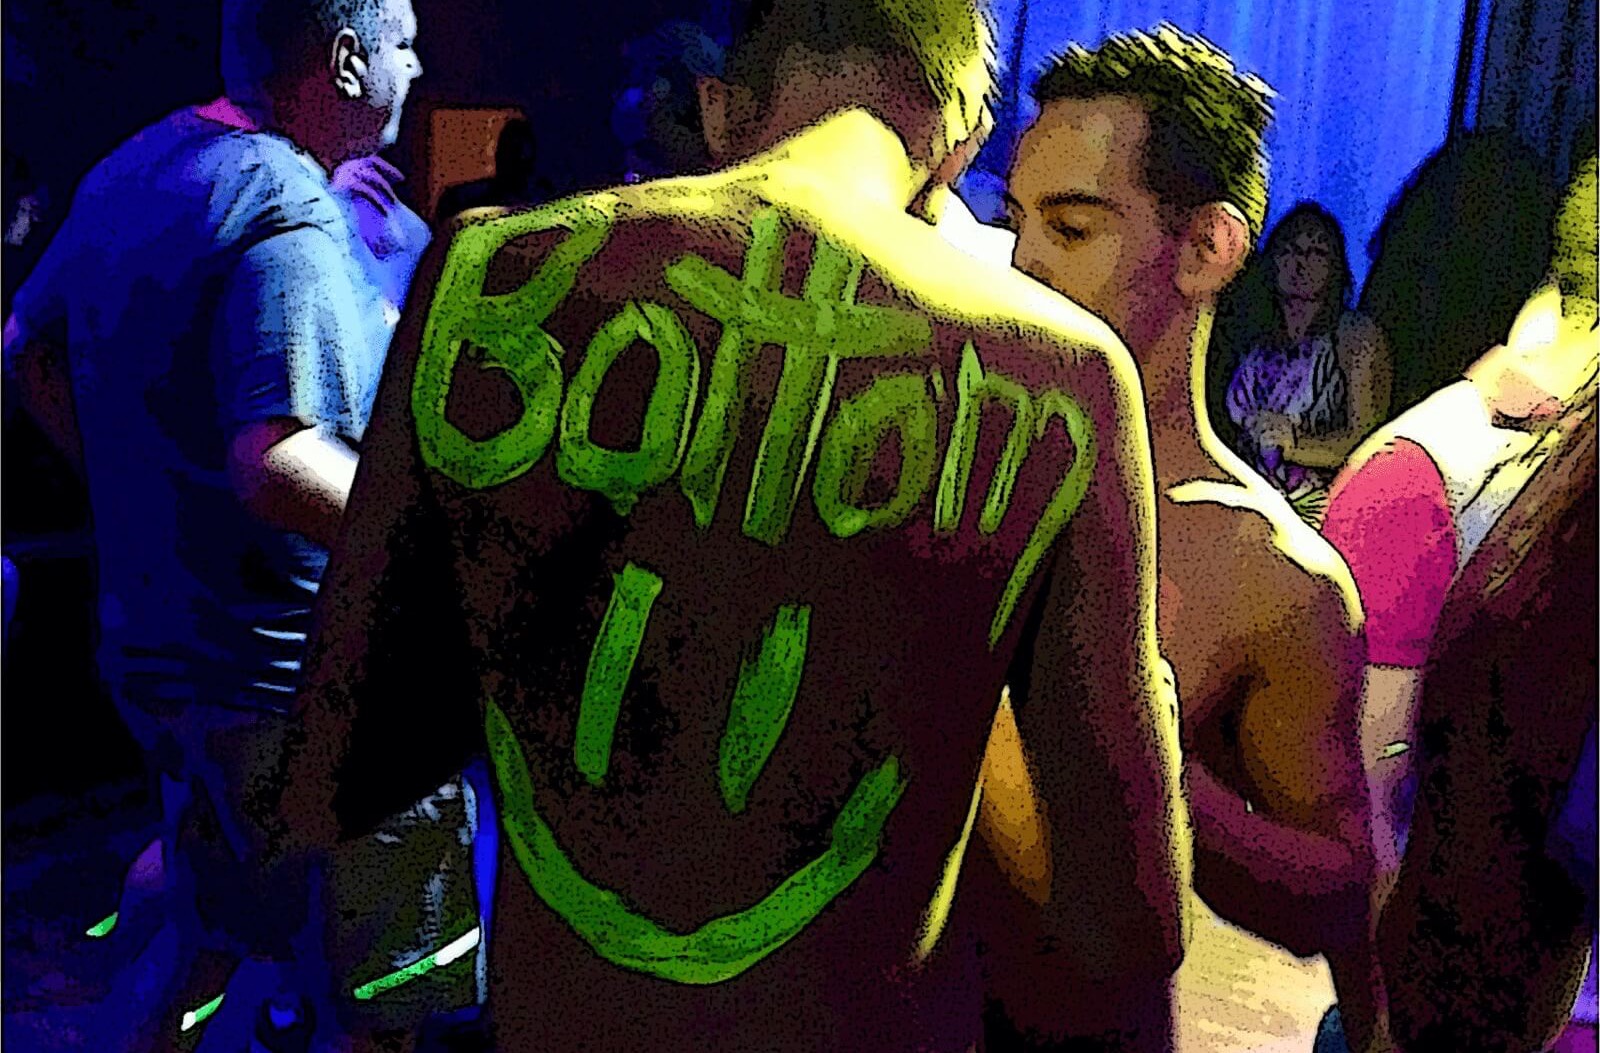 Shirtless man with Bottom and smiley face painted on back in neon.